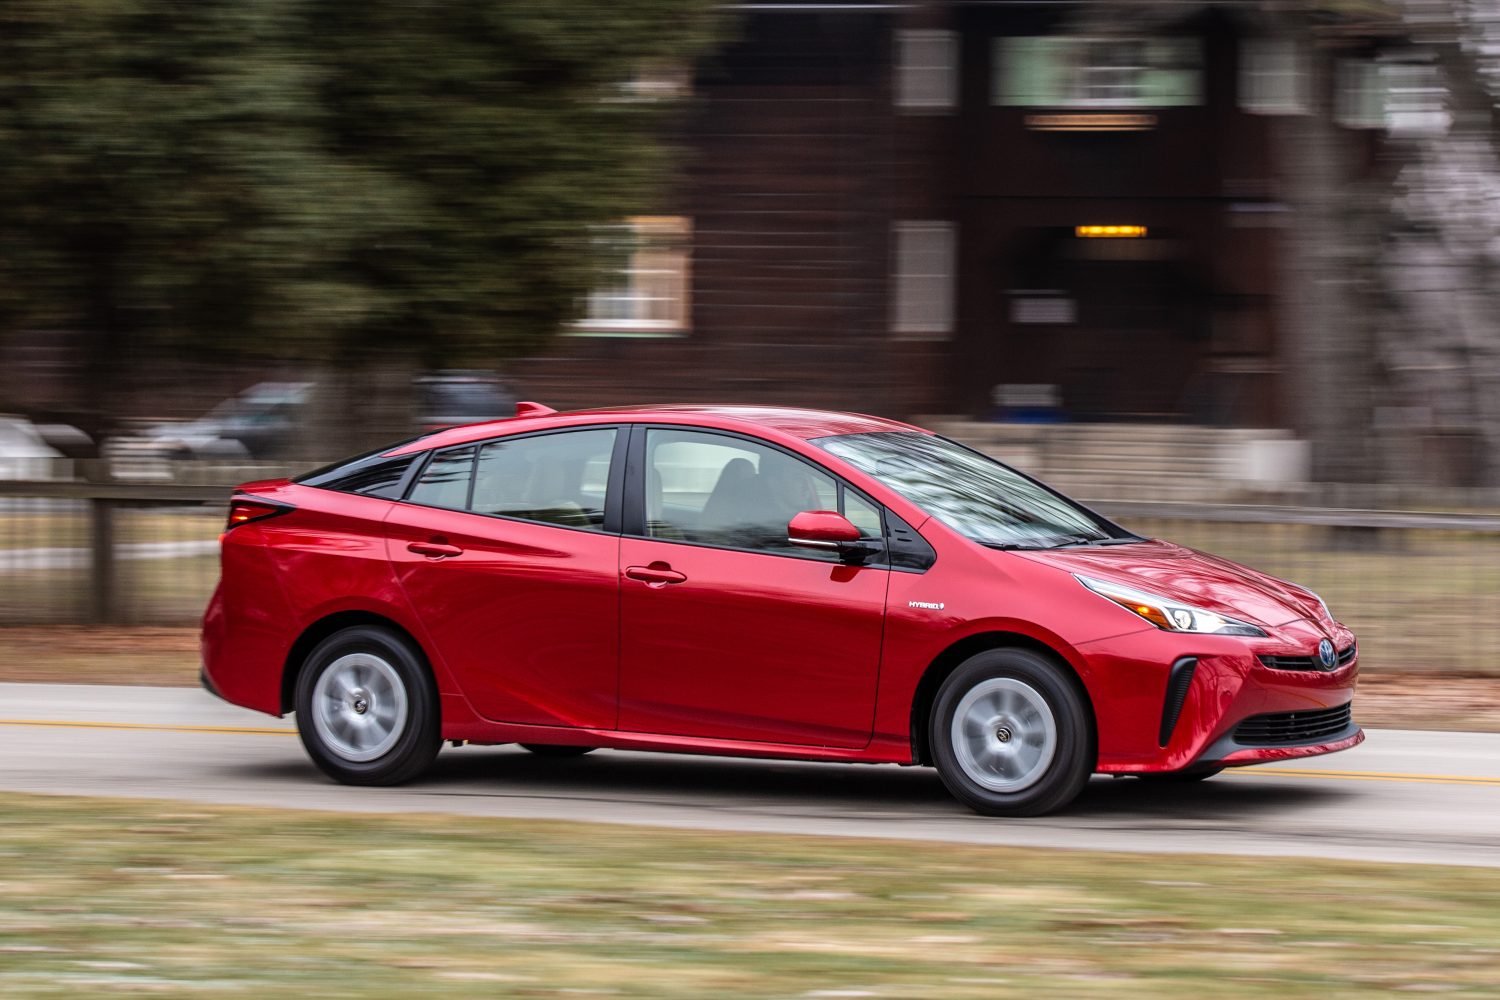 Toyota Prius Hybrid history lessons fall on deaf ears